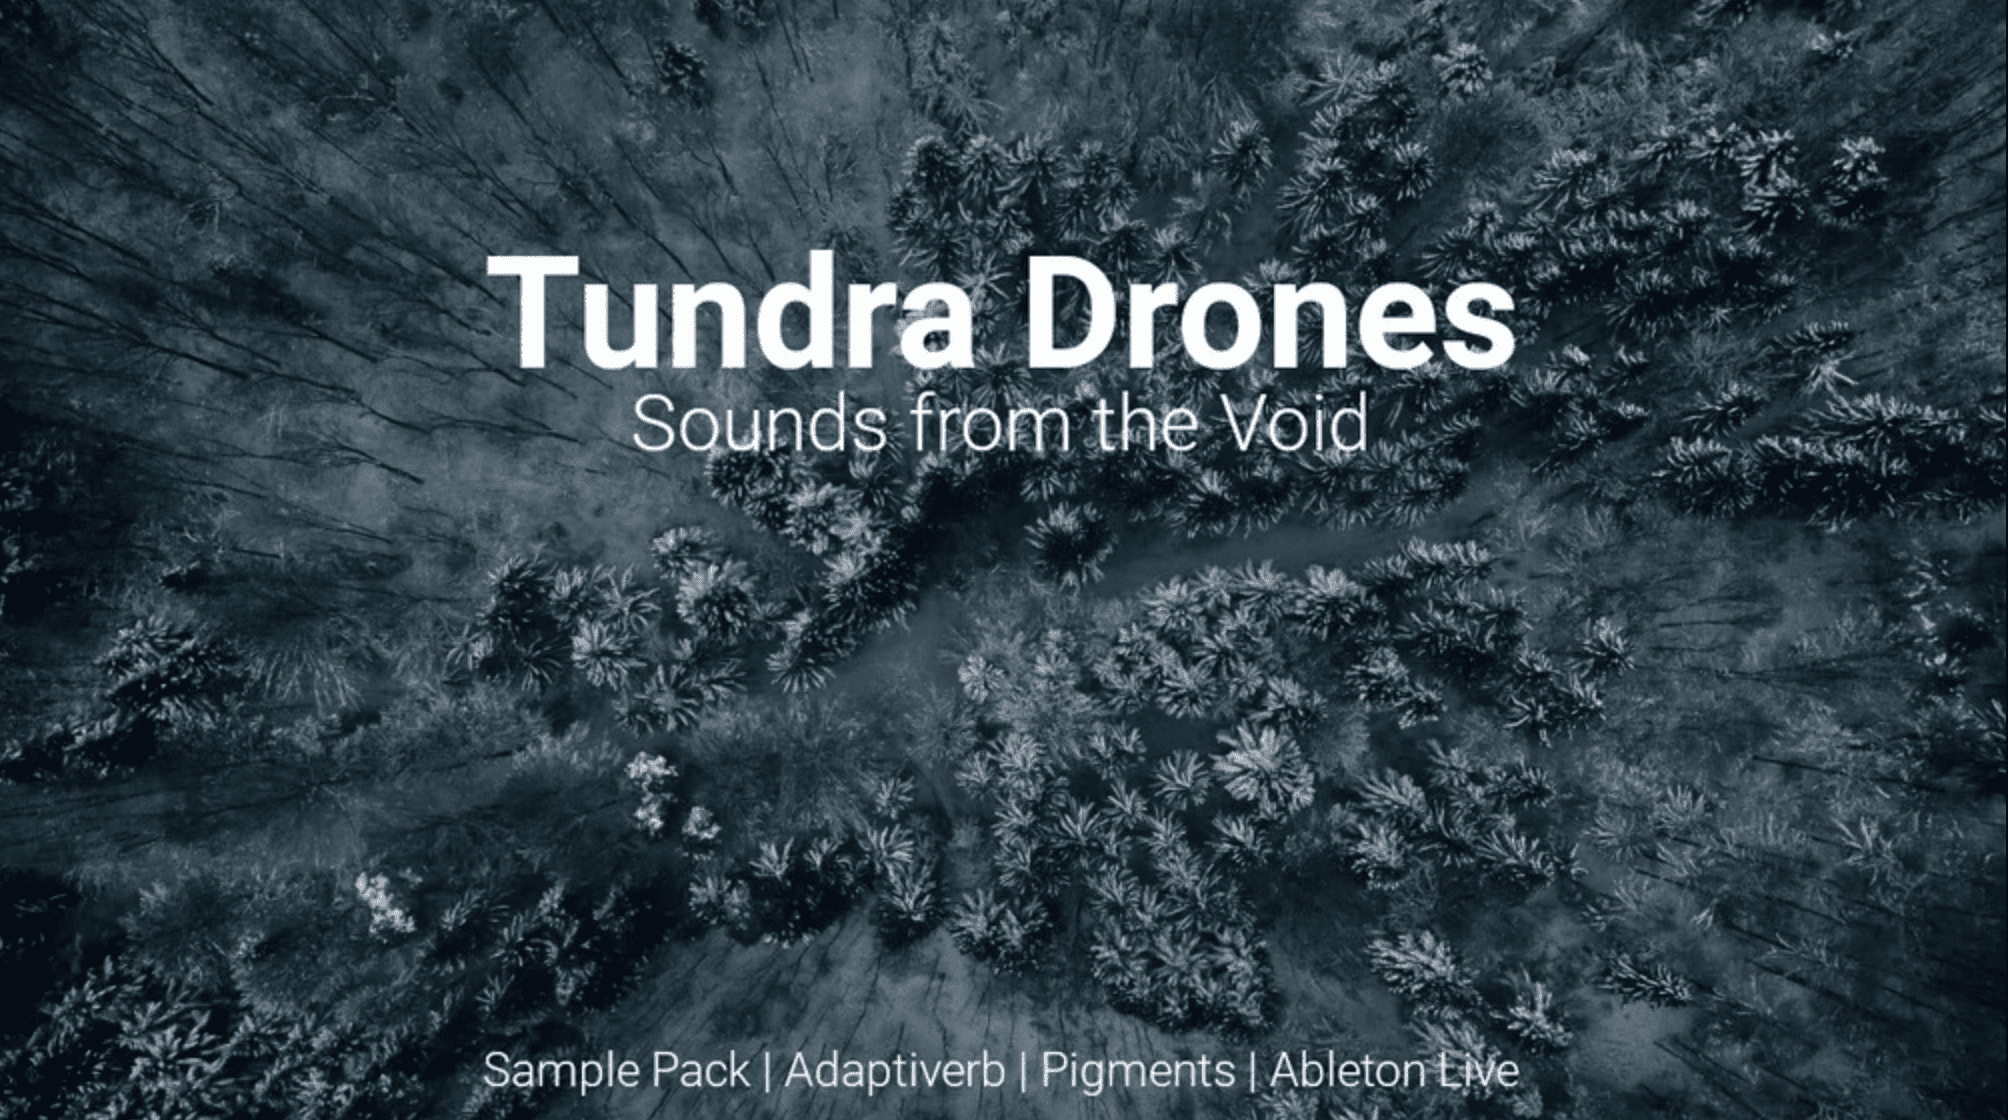 Drone Soundscapes Tundra Drones Sounds for a Vast Empty World